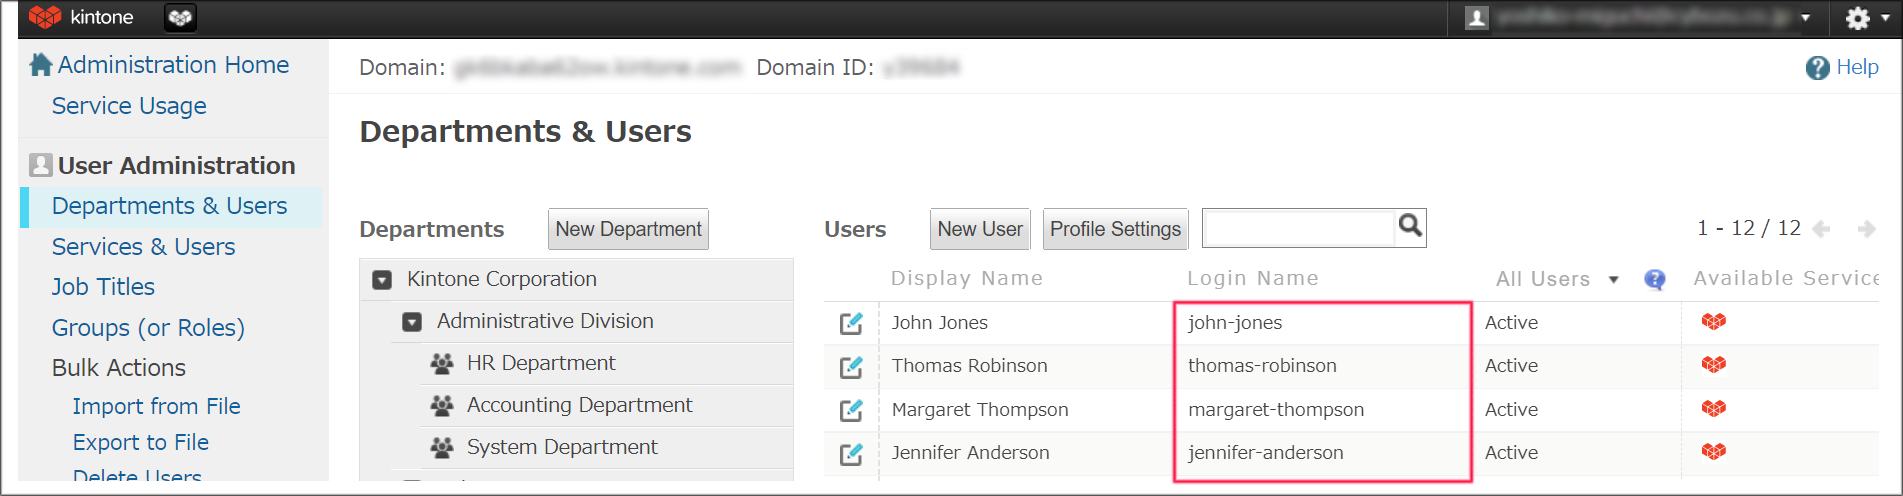 Screenshot: The "Departments & Users" setting screen of Users & System Administration